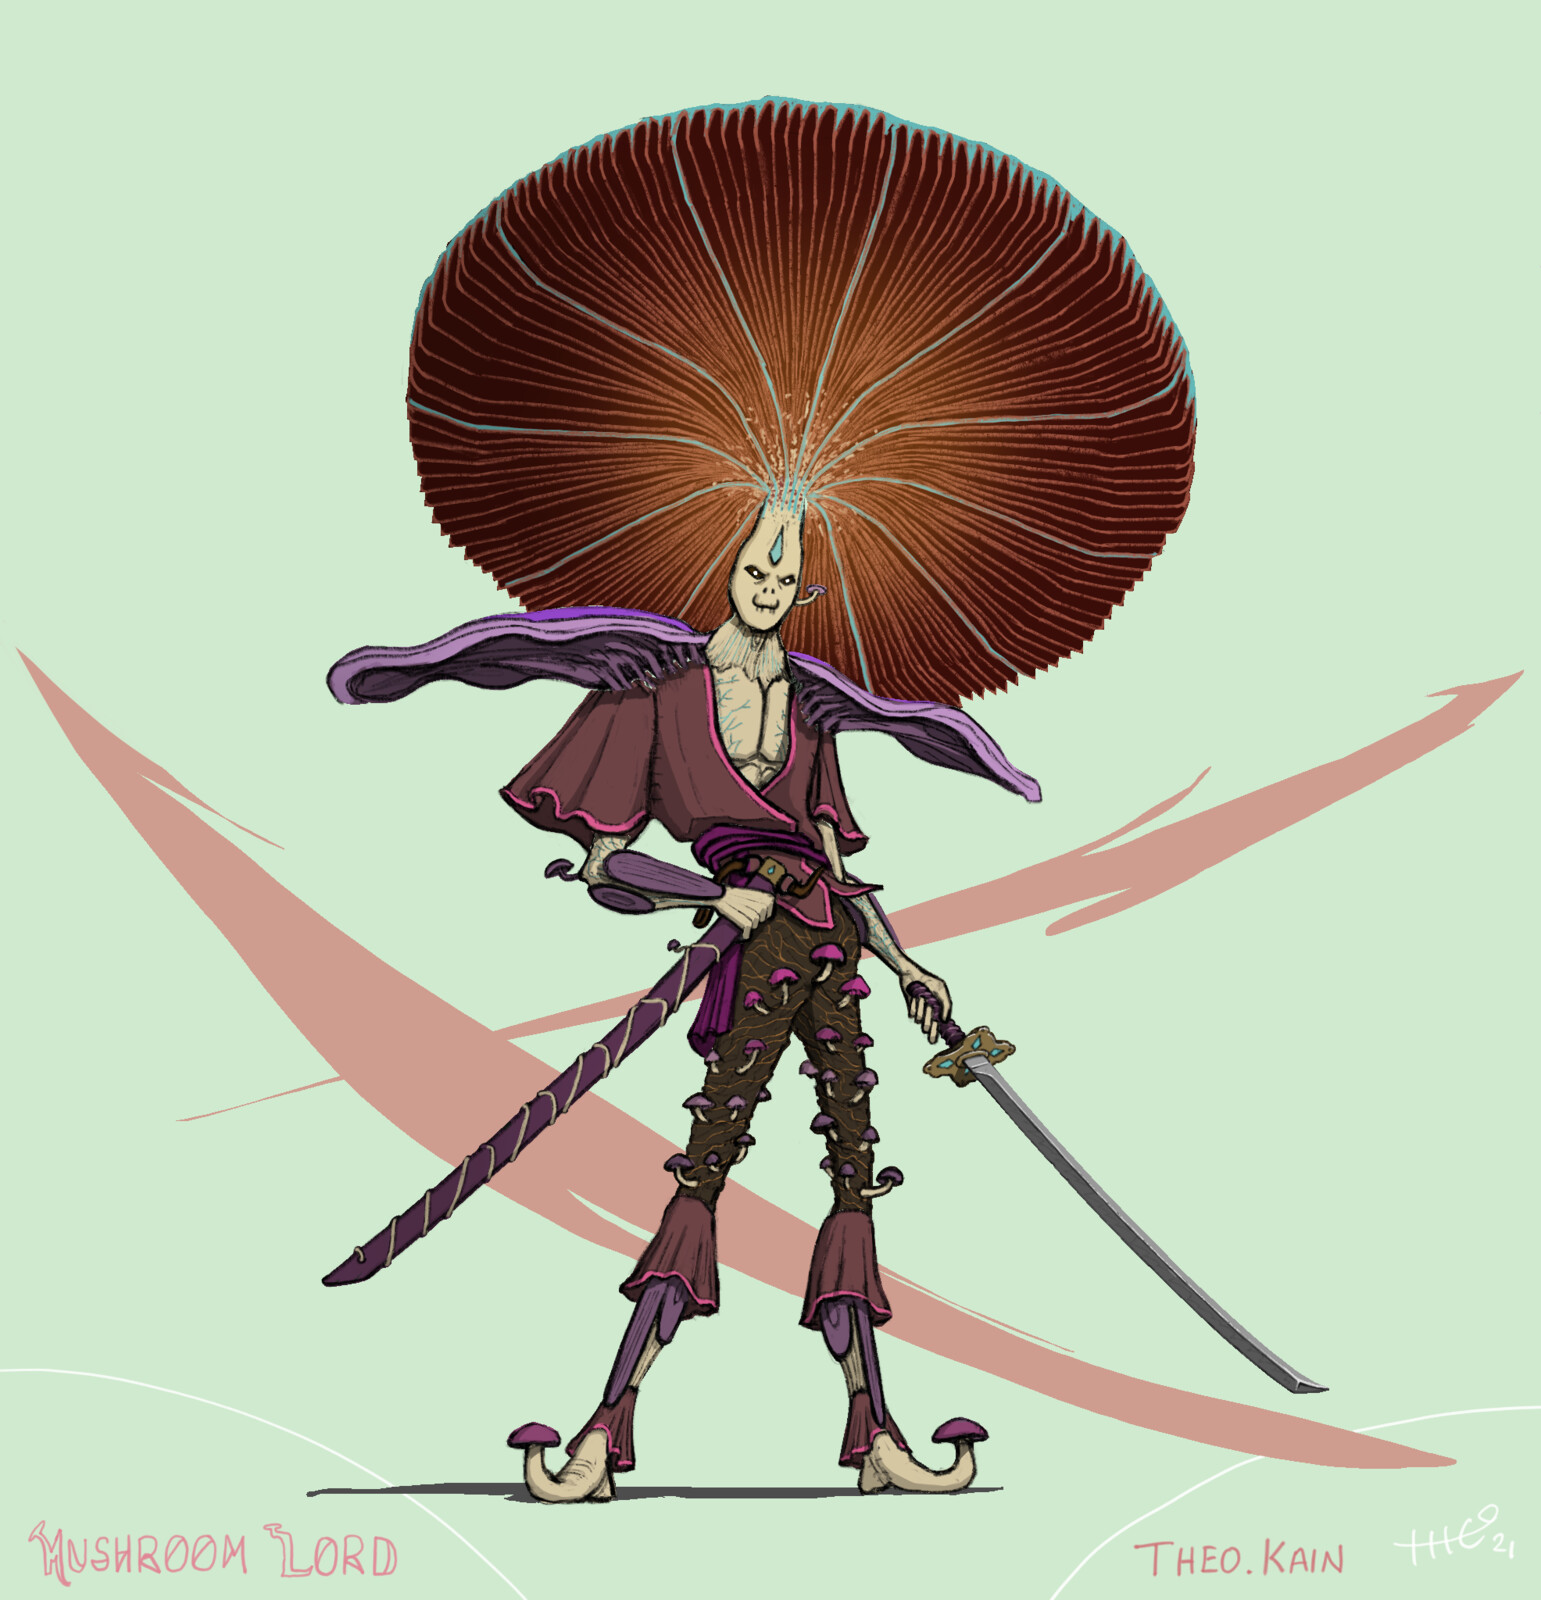 I wanted to fit as many mushrooms as possible into his design, and I did, but feel there should be moar!